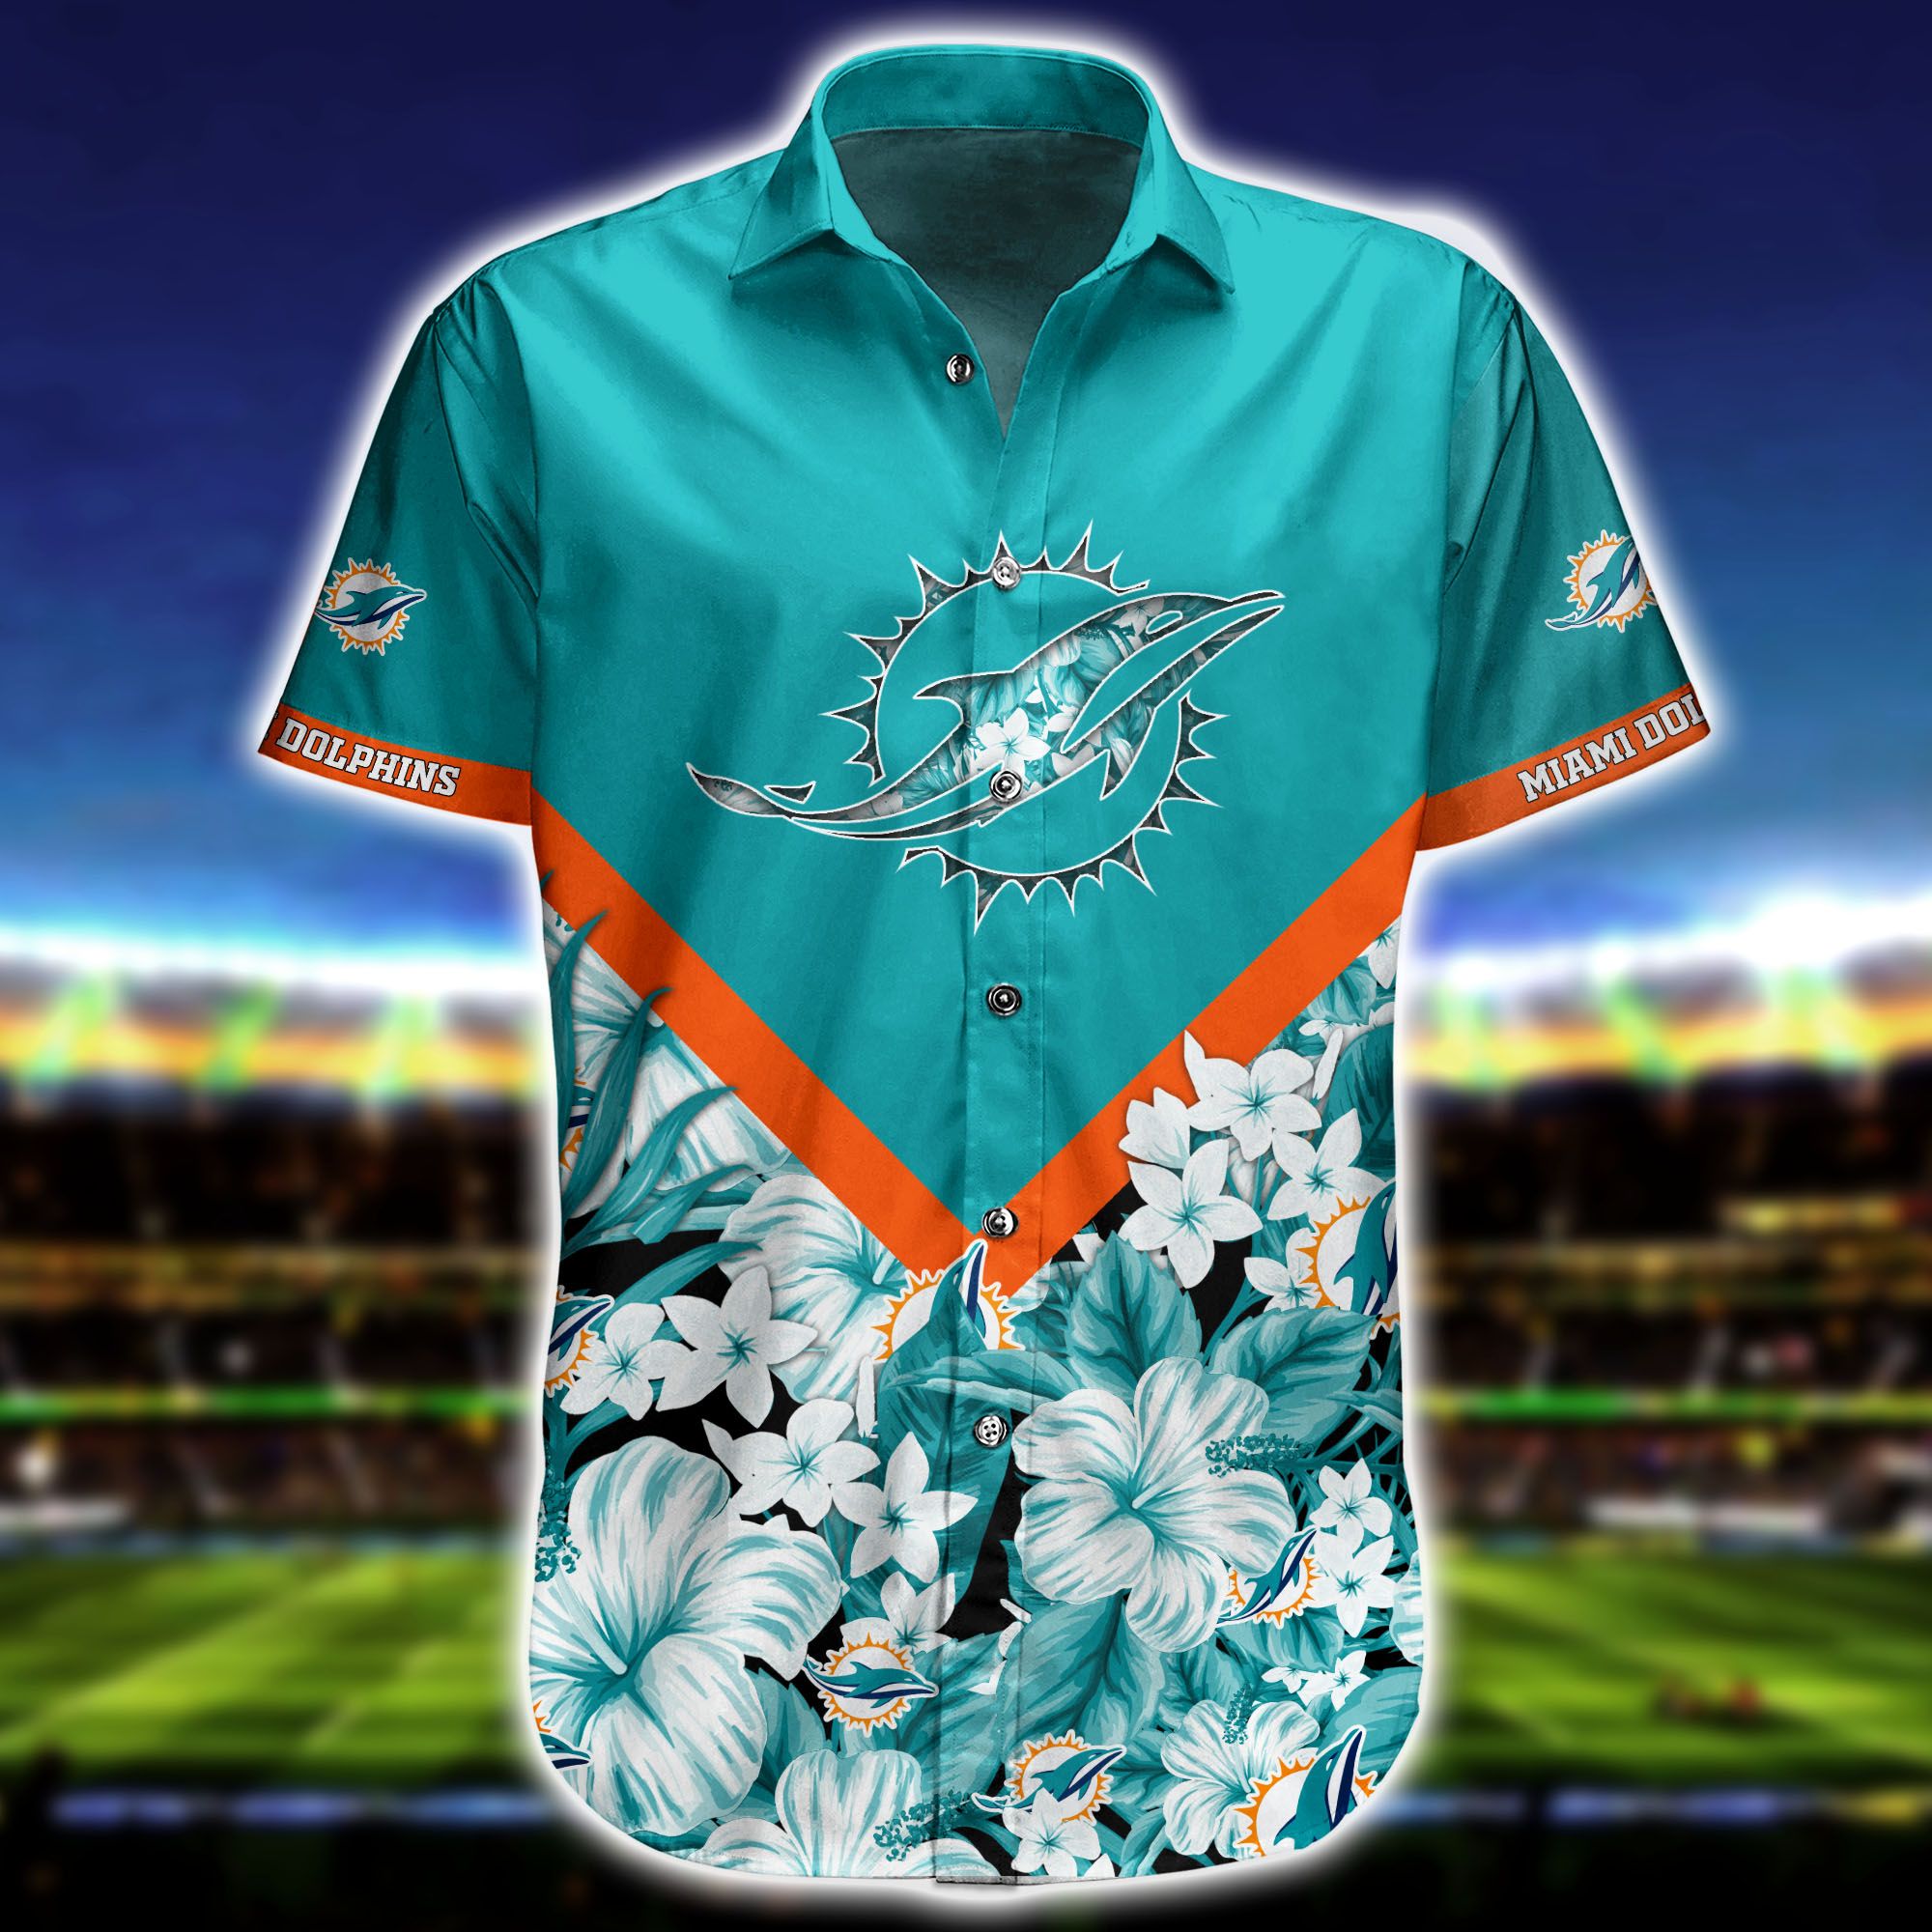 personalized miami dolphins jersey